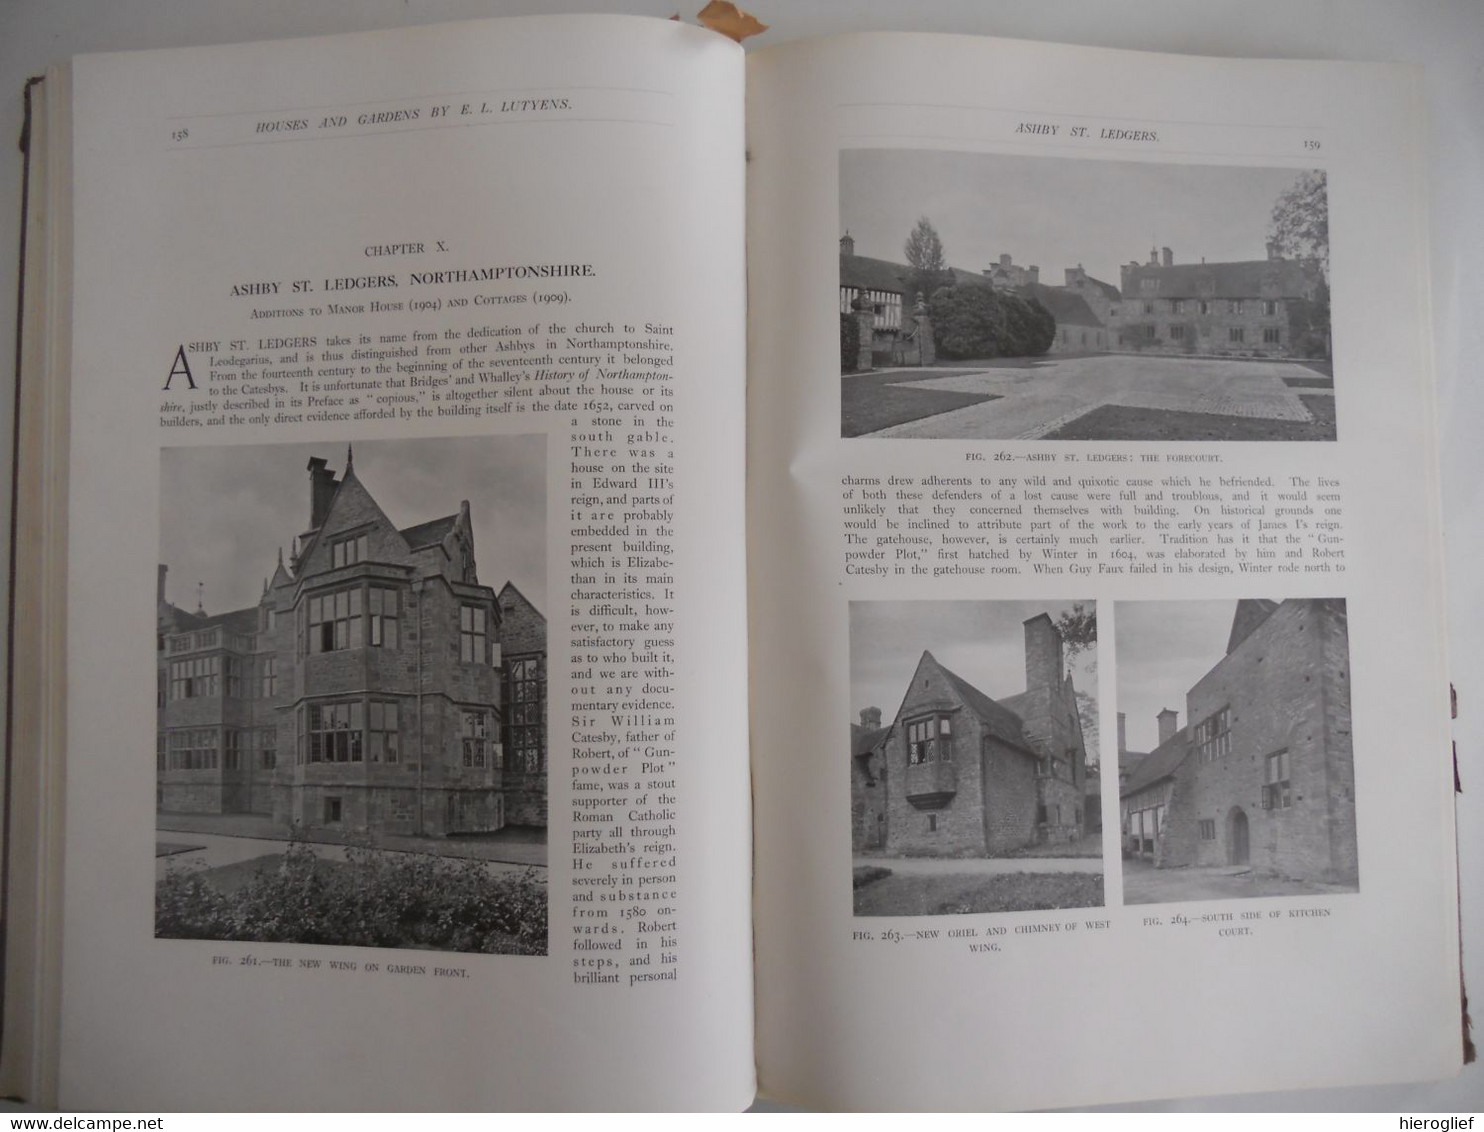 HOUSES AND GARDENS BY E.L. LUTYEN decribedb&v criticised by Lawrence Weaver 1913 london